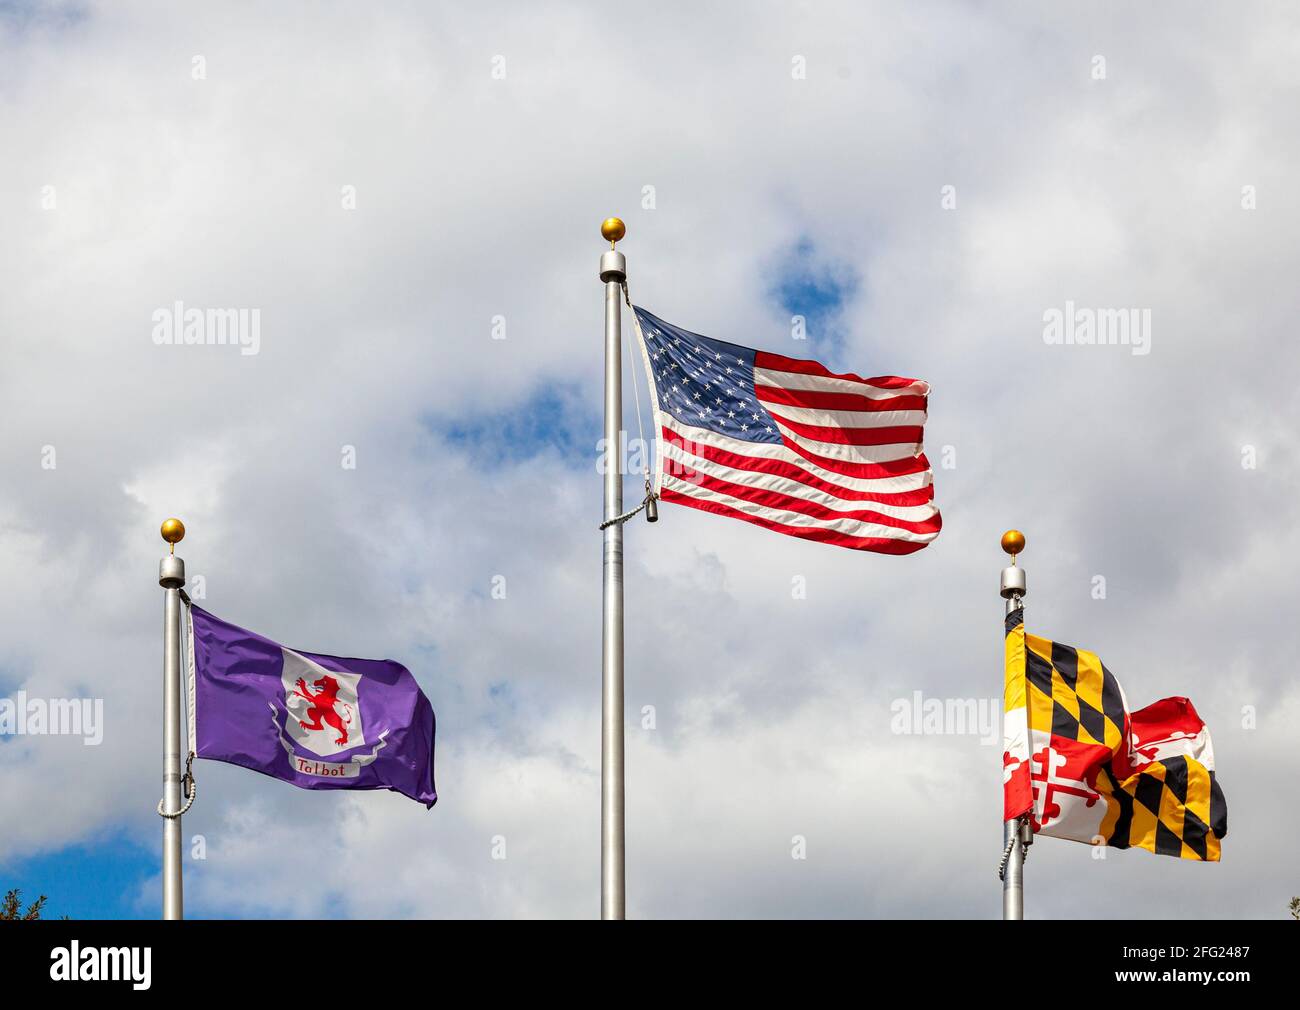 Flags of the USA, State of Maryland, and Talbot County, MD are waving on side by side flag posts on a cloudy day. Stock Photo